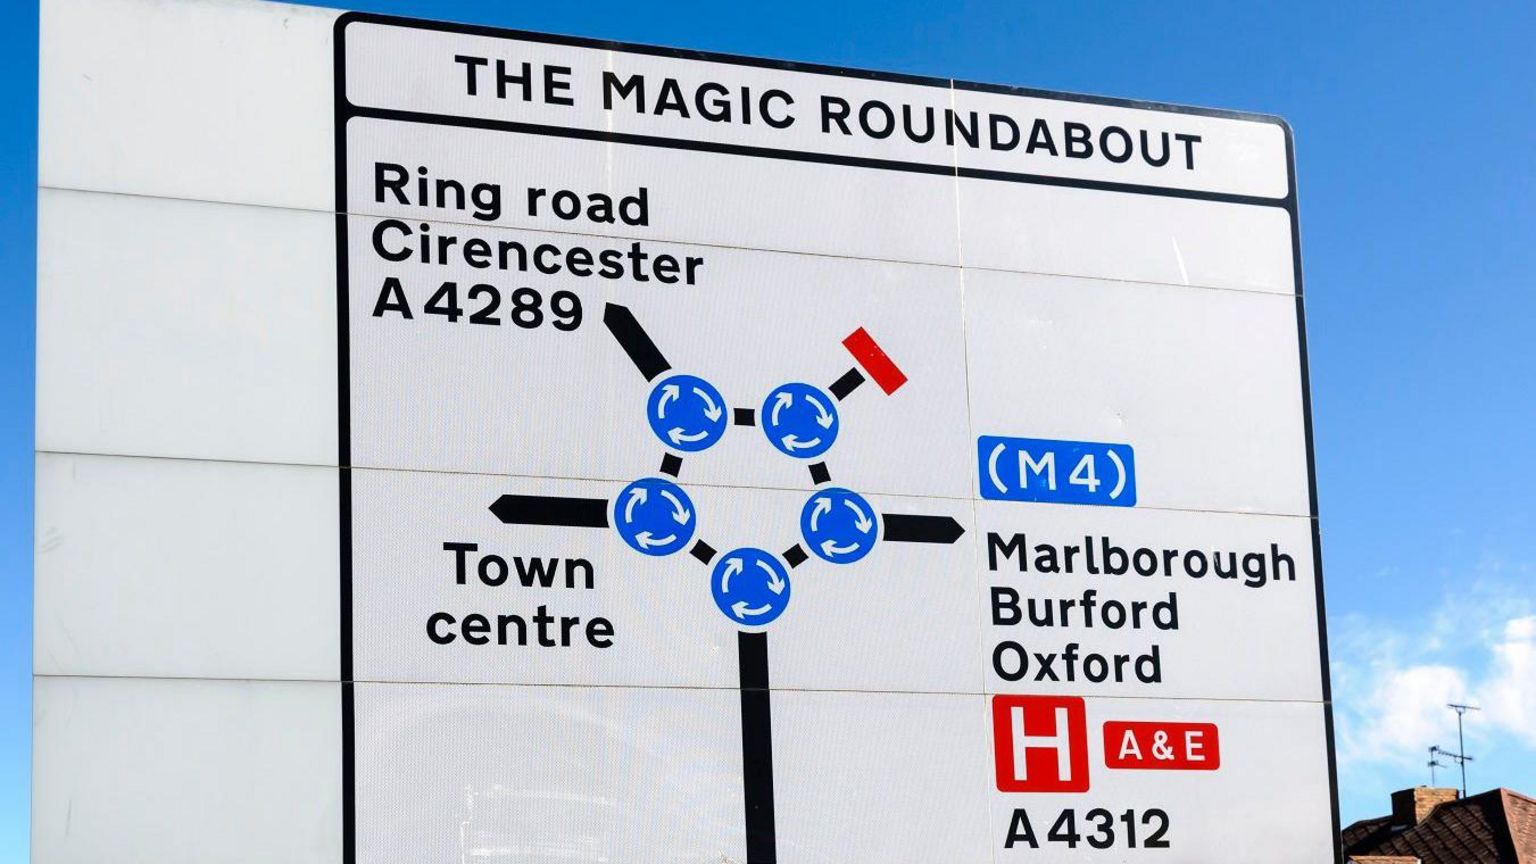 A sign showing the magic roundabout in Swindon